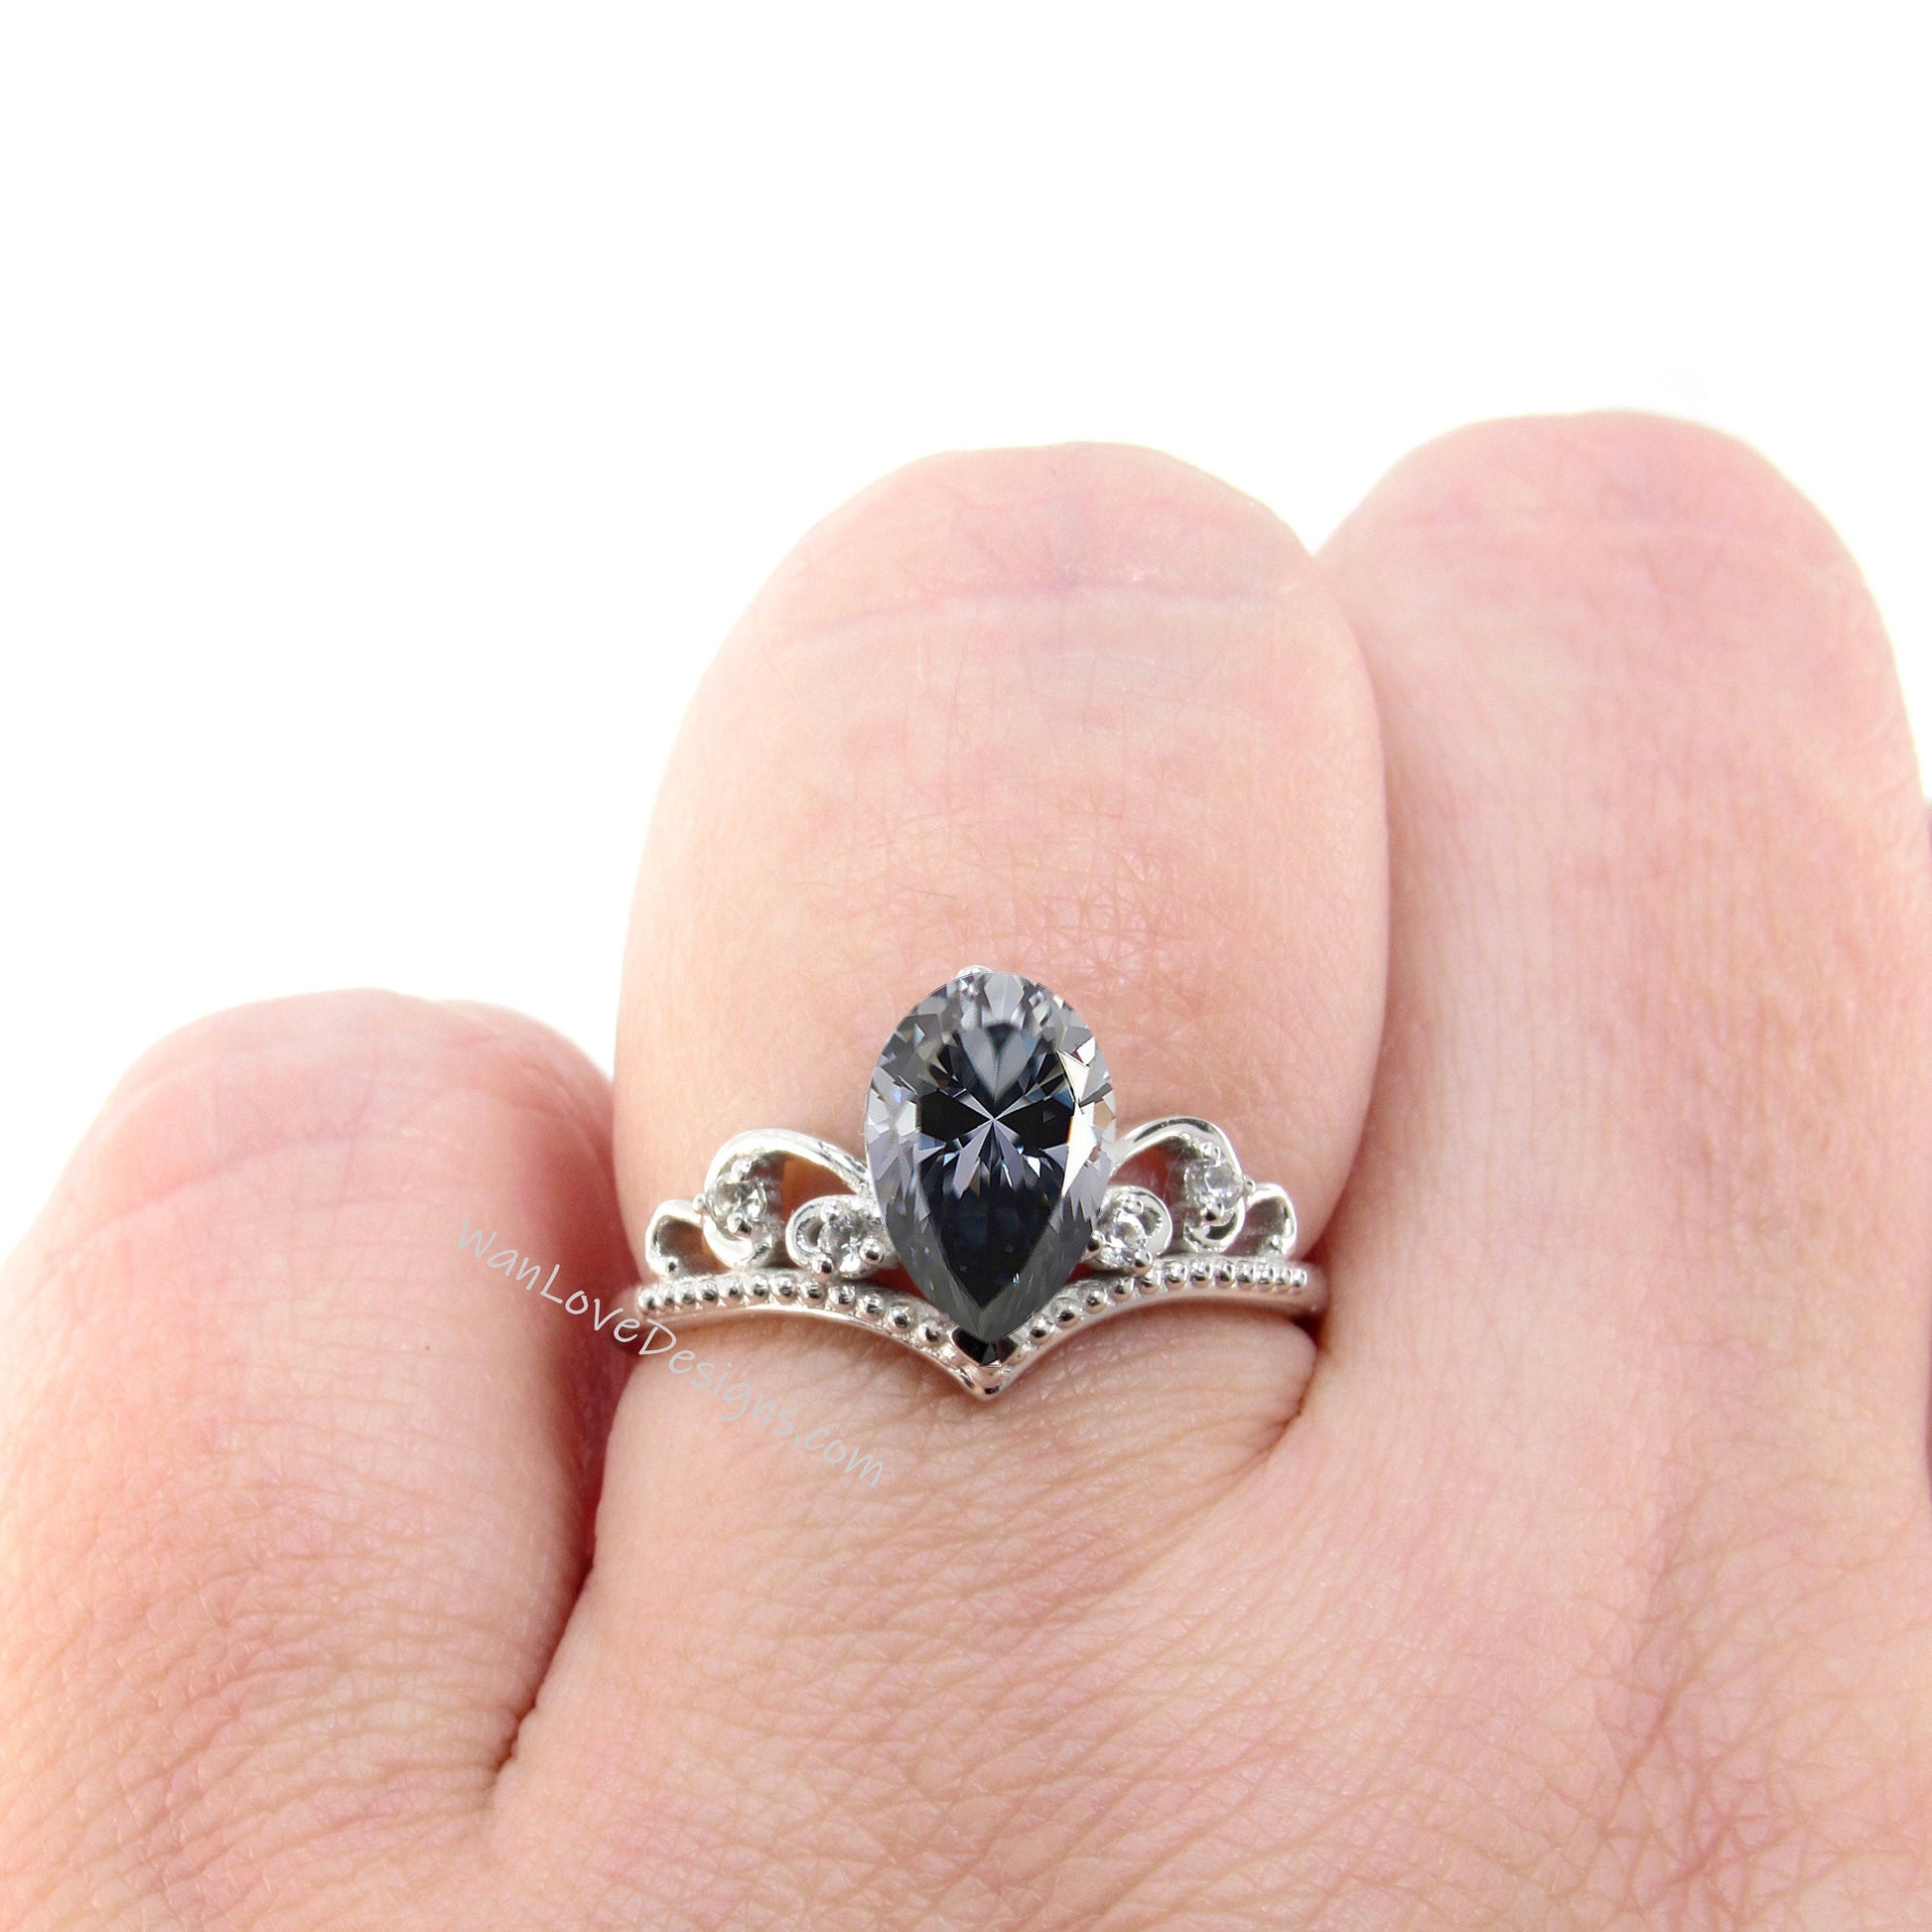 Vintage pear engagement ring| Grey moissanite v chevron wedding ring| Cluster Pear shaped filigree Bridal ring| Antique Anniversary ring WanLoveDesigns